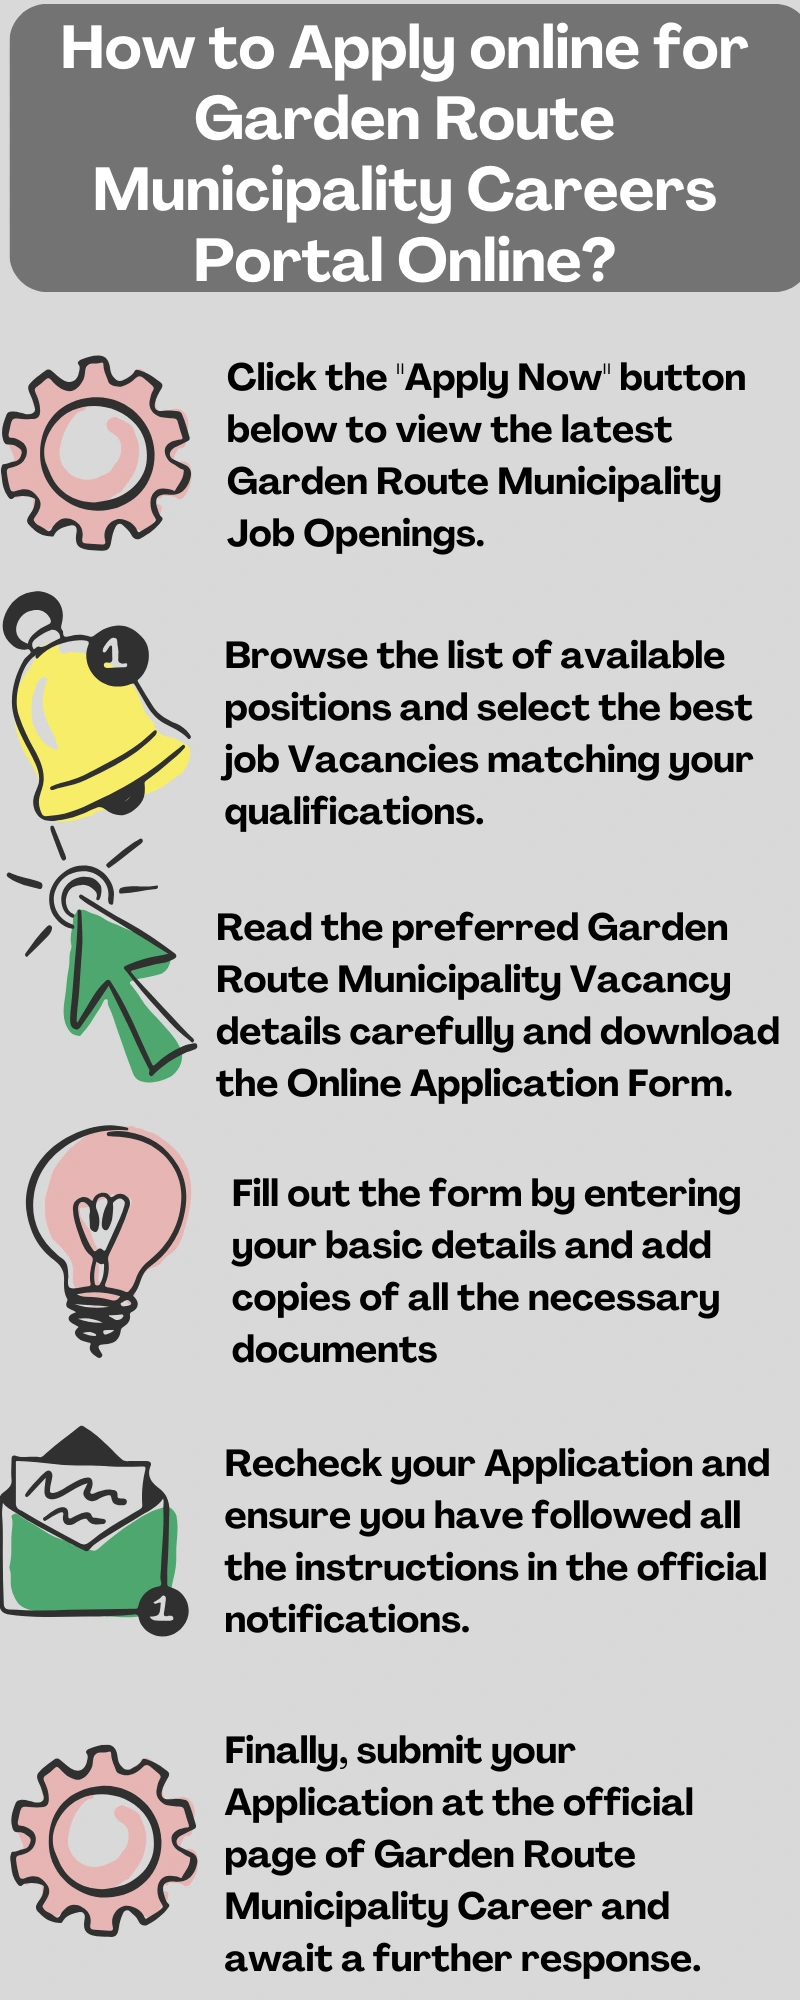 How to Apply online for Garden Route Municipality Careers Portal Online?